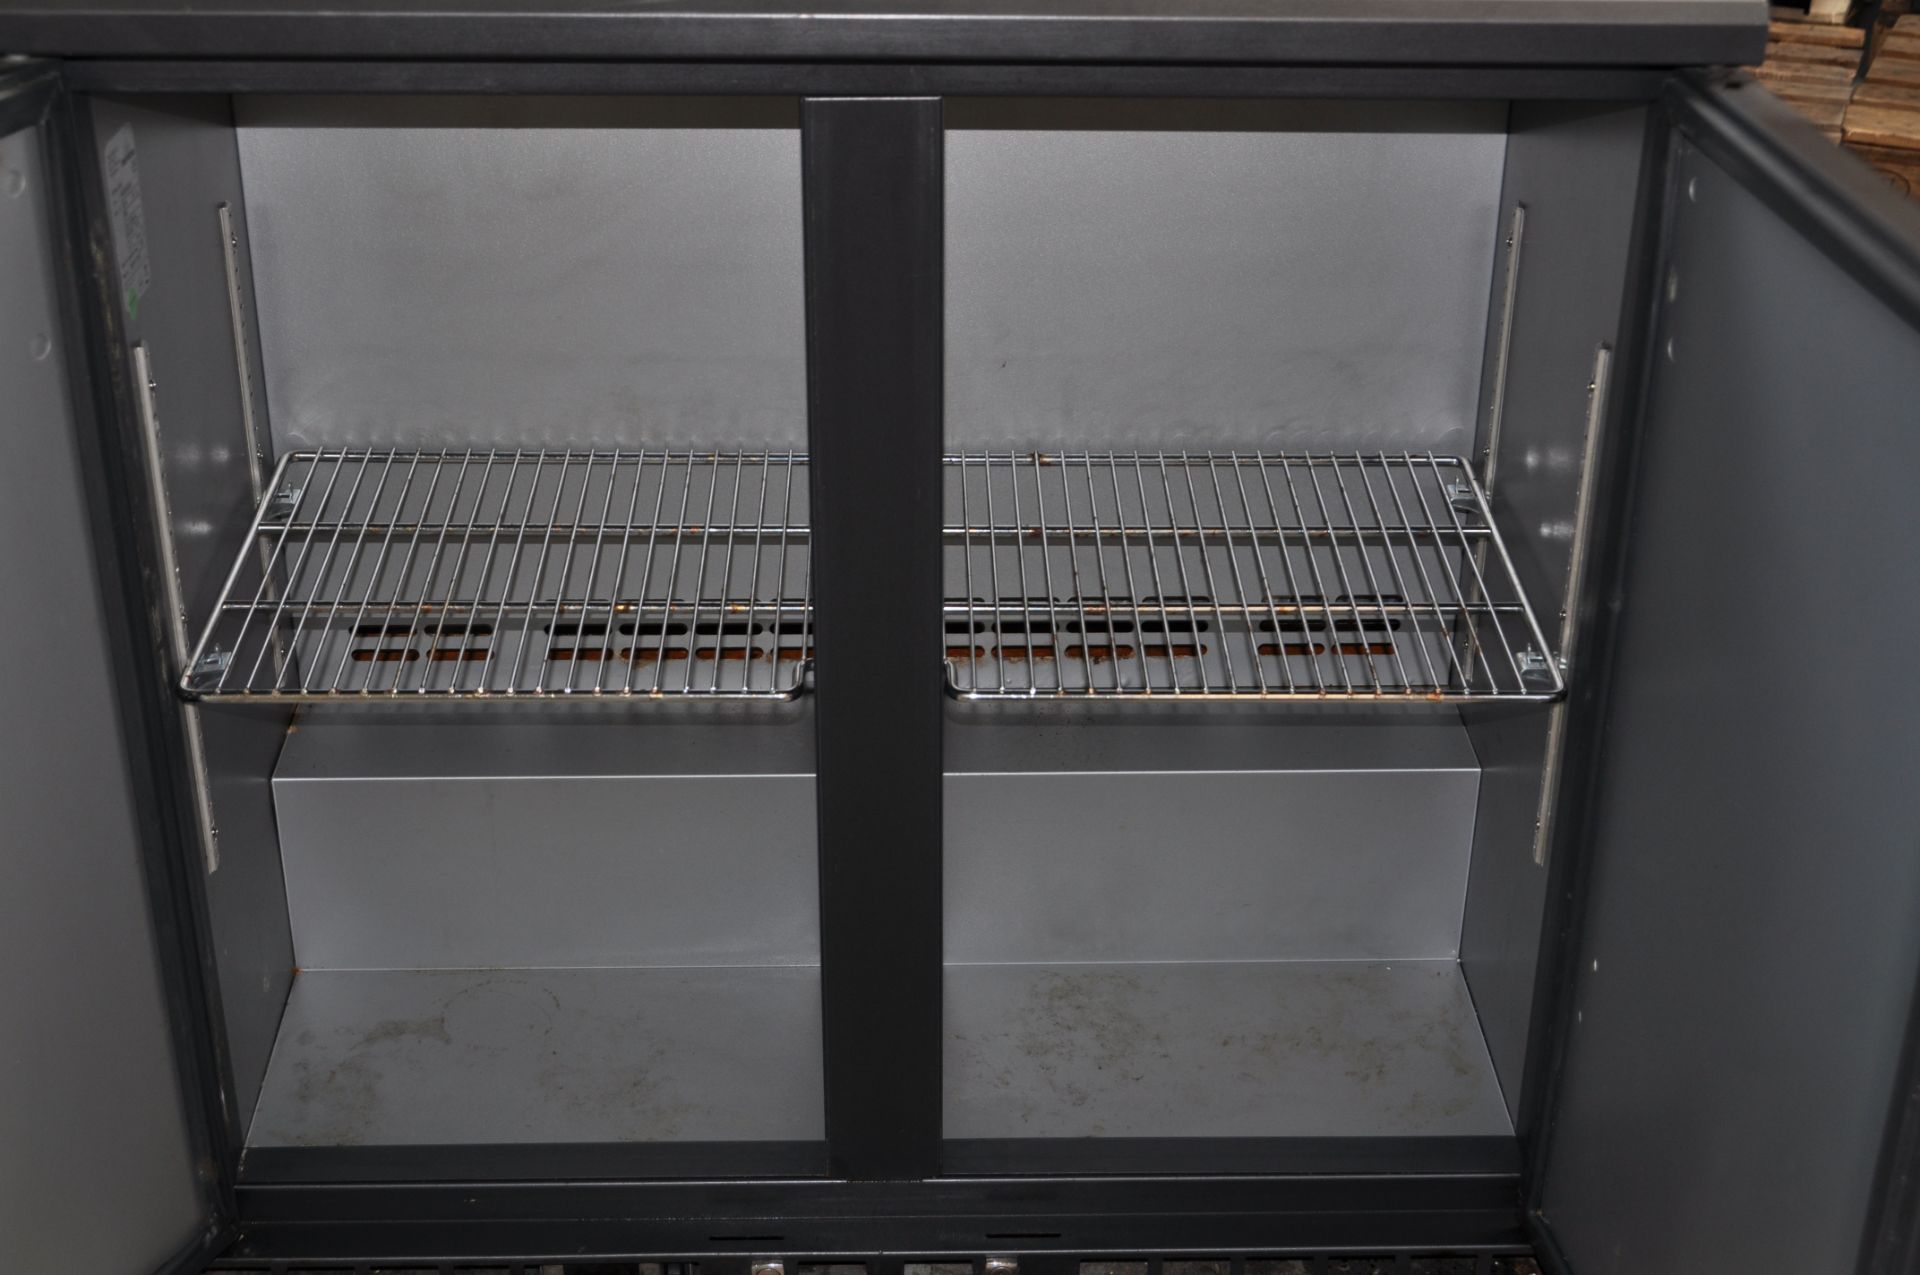 1 x Gamko Two Door Bottle Cooler With Internal Shelves - Ideal For Pubs, Clubs or Restaurants - BEER - Image 3 of 5